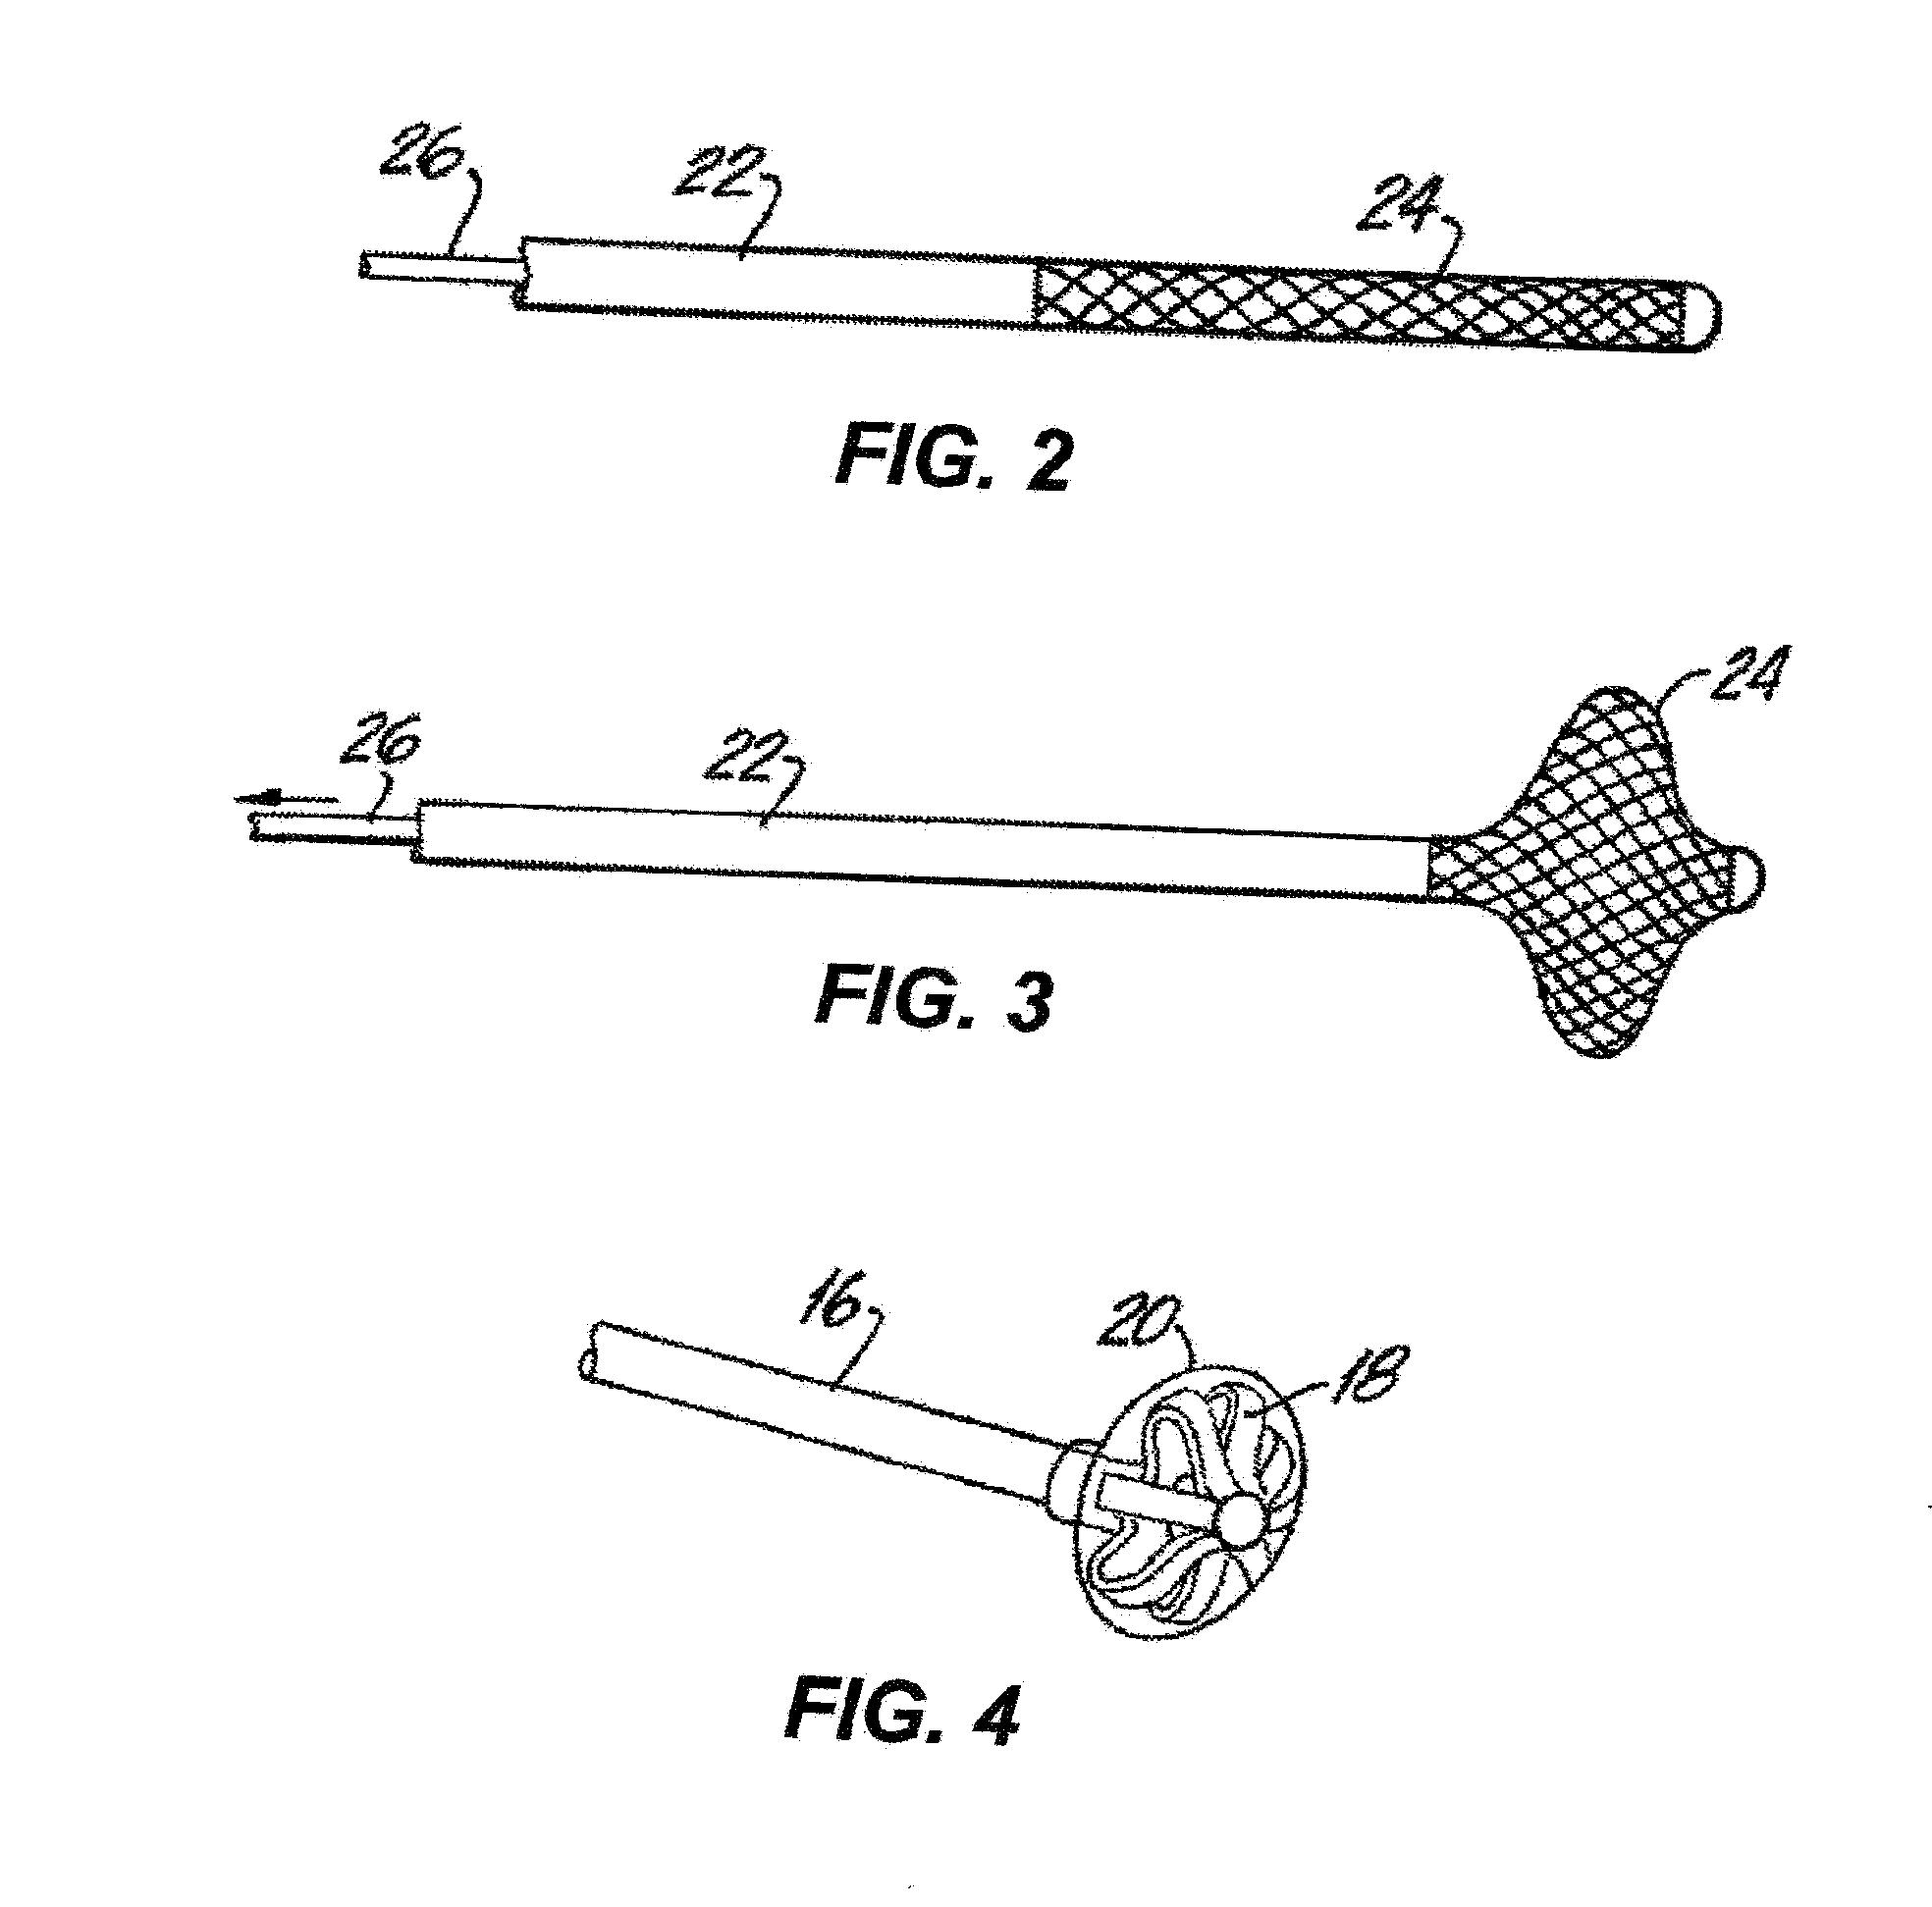 Temporary Vascular Scaffold and Scoring Device